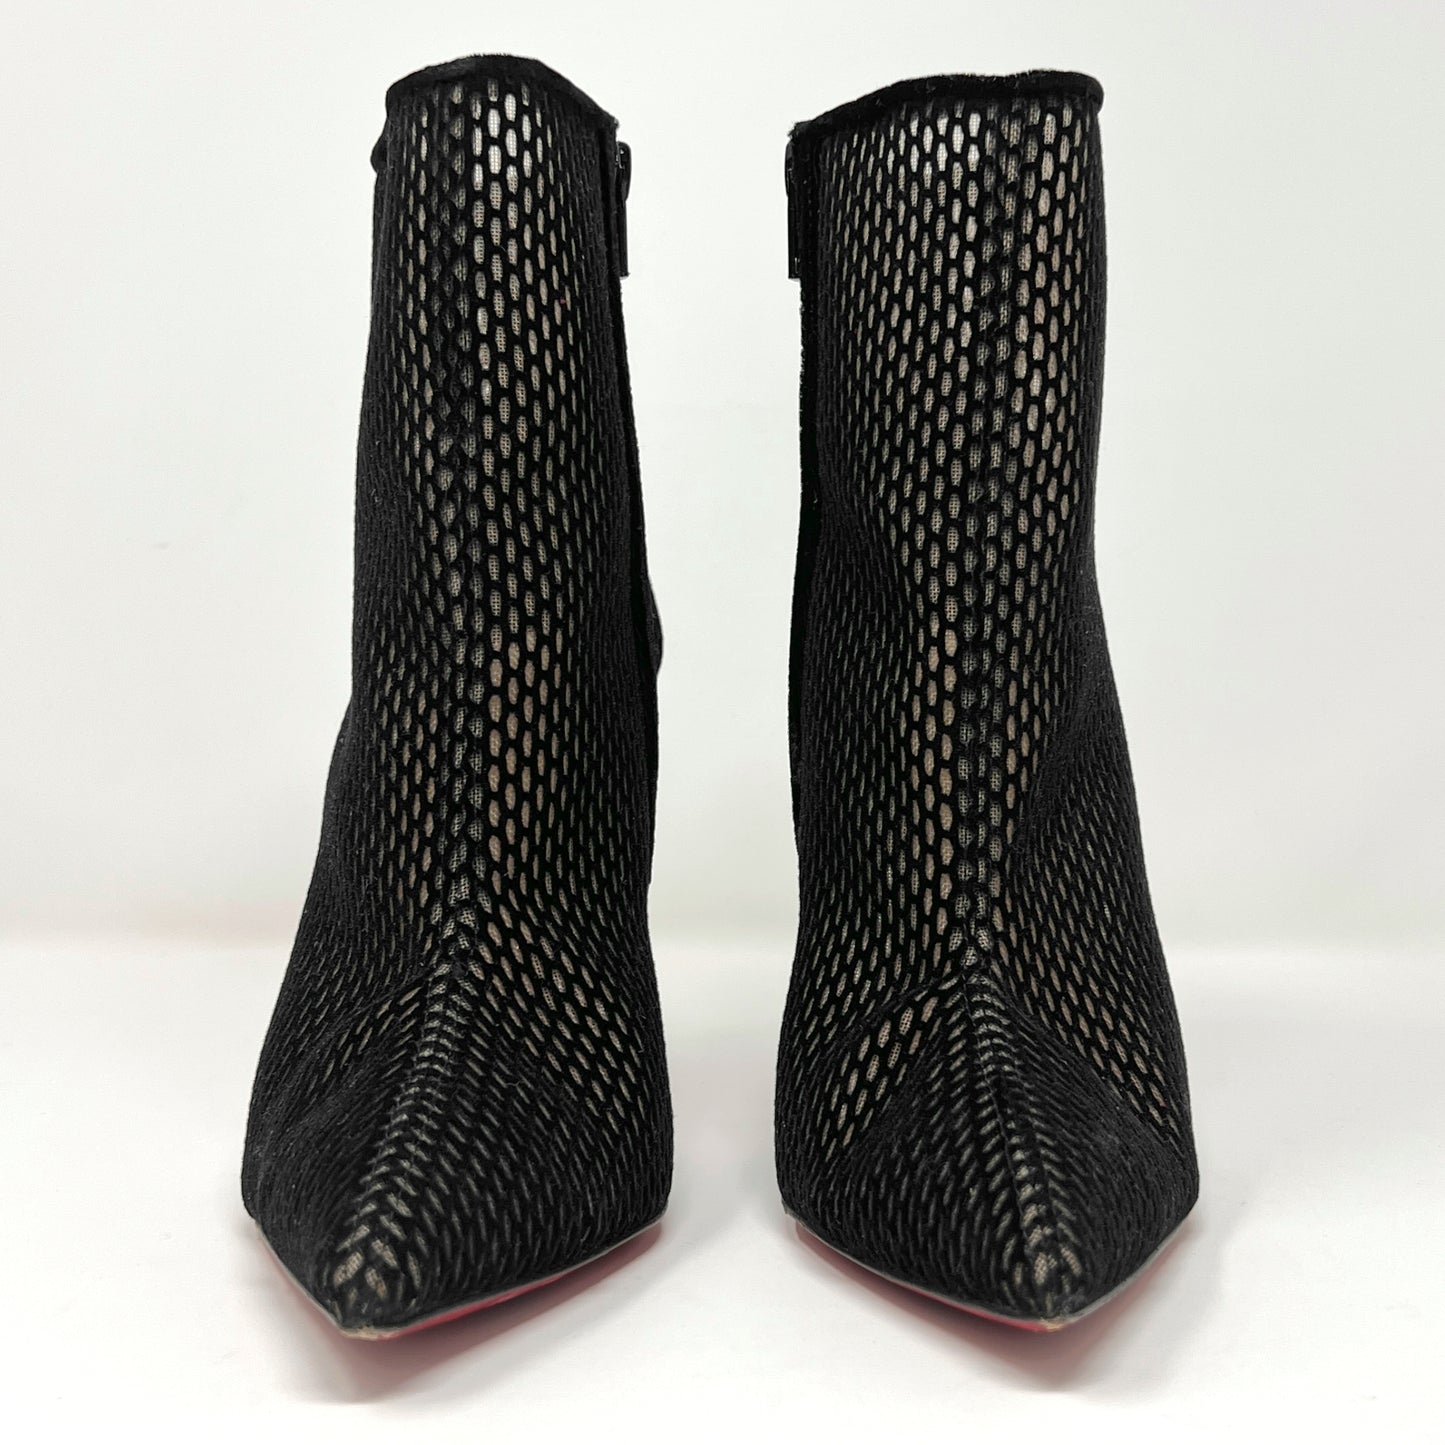 Christian Louboutin Gipsybootie Black Suede Velvet Pointed Toe Ankle Boots Heels Size EU 39